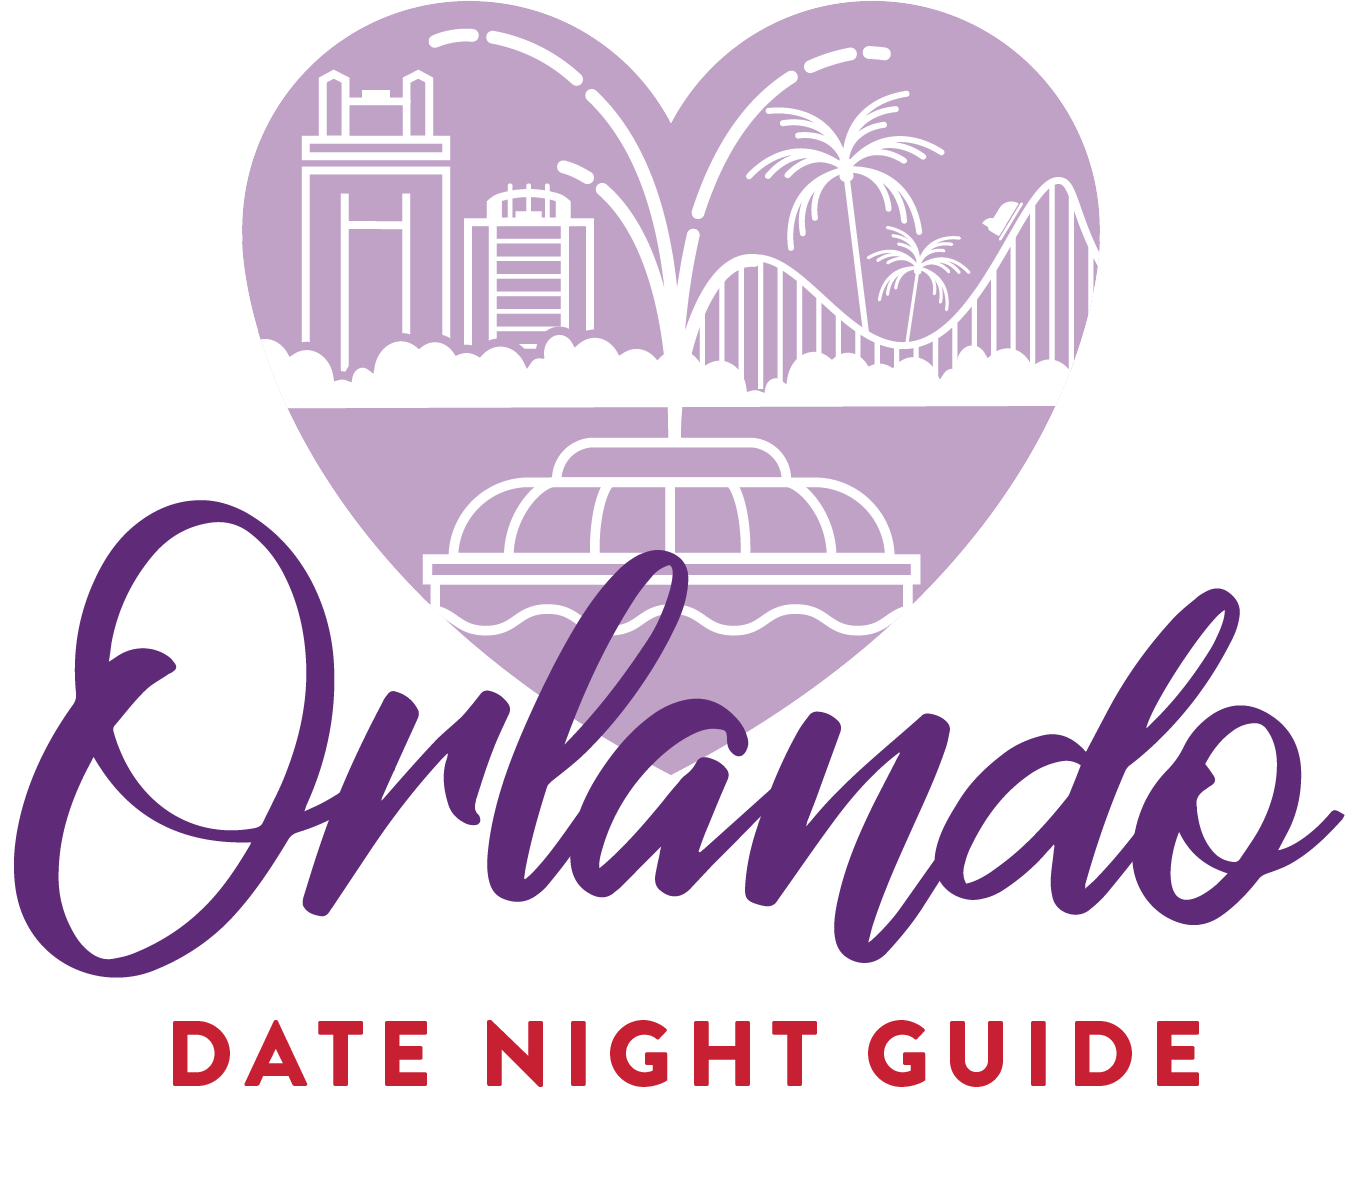 Orlando Date Night Guide -LOGO PNG.png